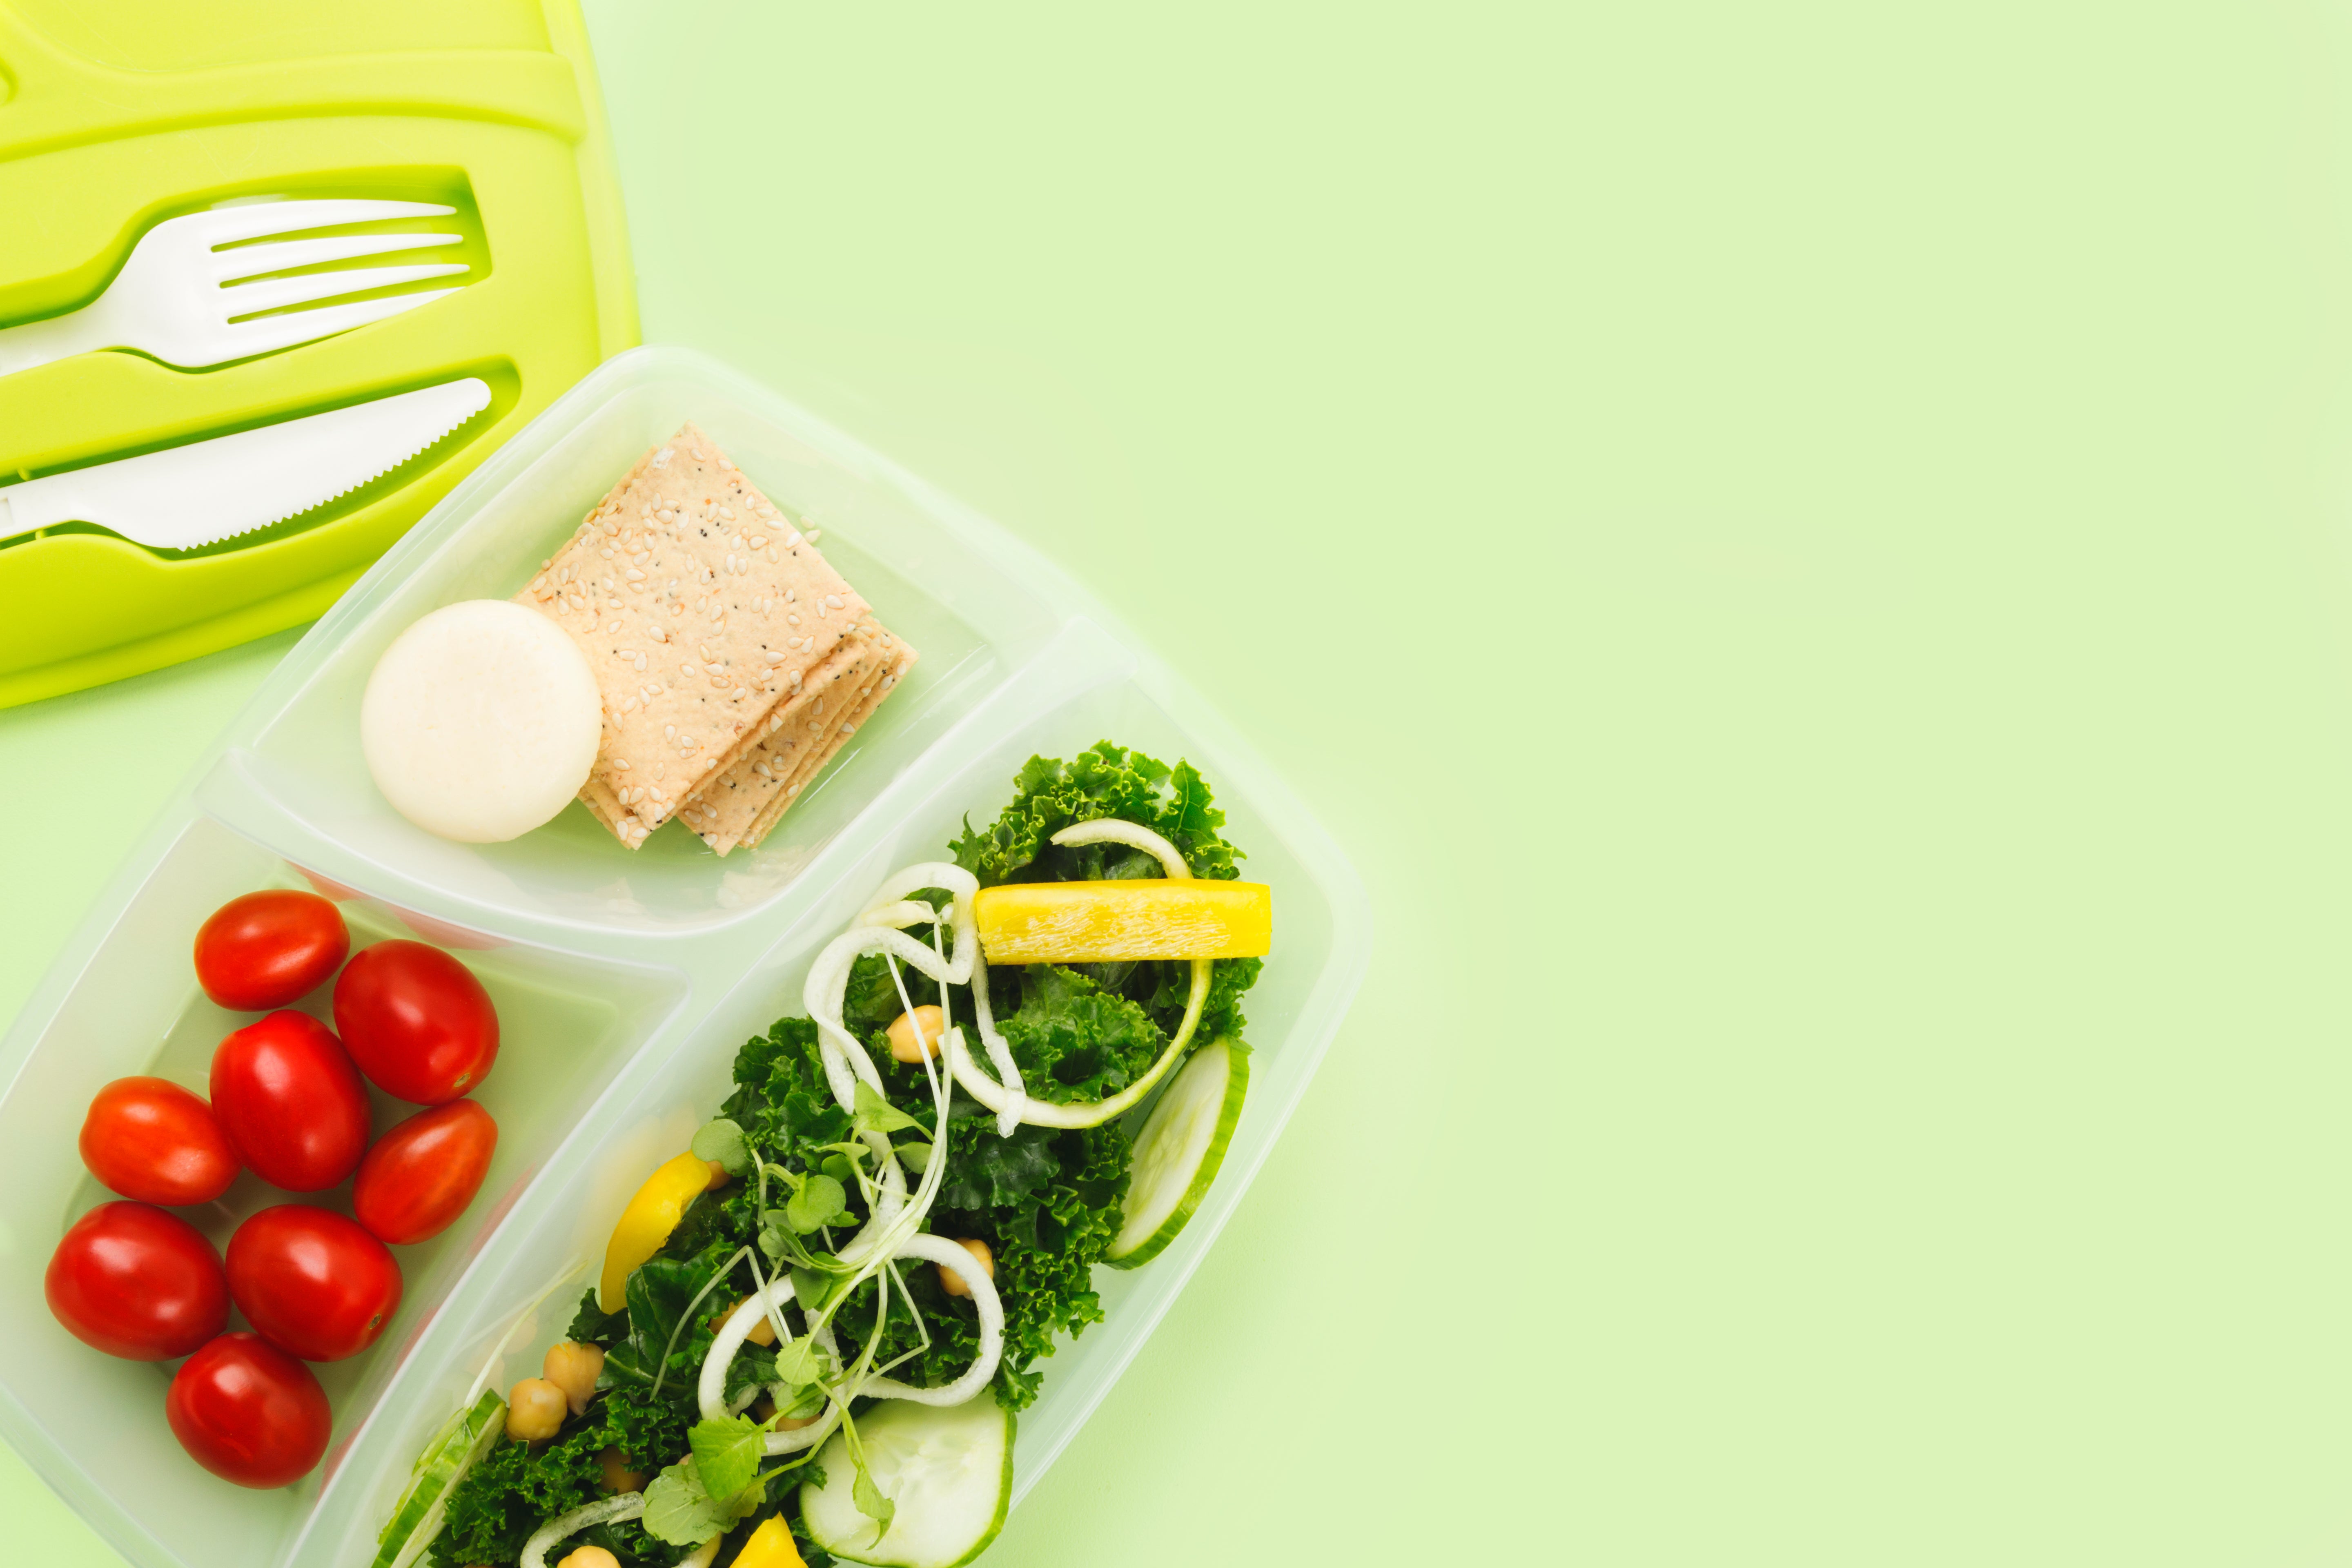 Browse Free HD Images of A Tupperware Lunch Box Separates Salad Ingredients